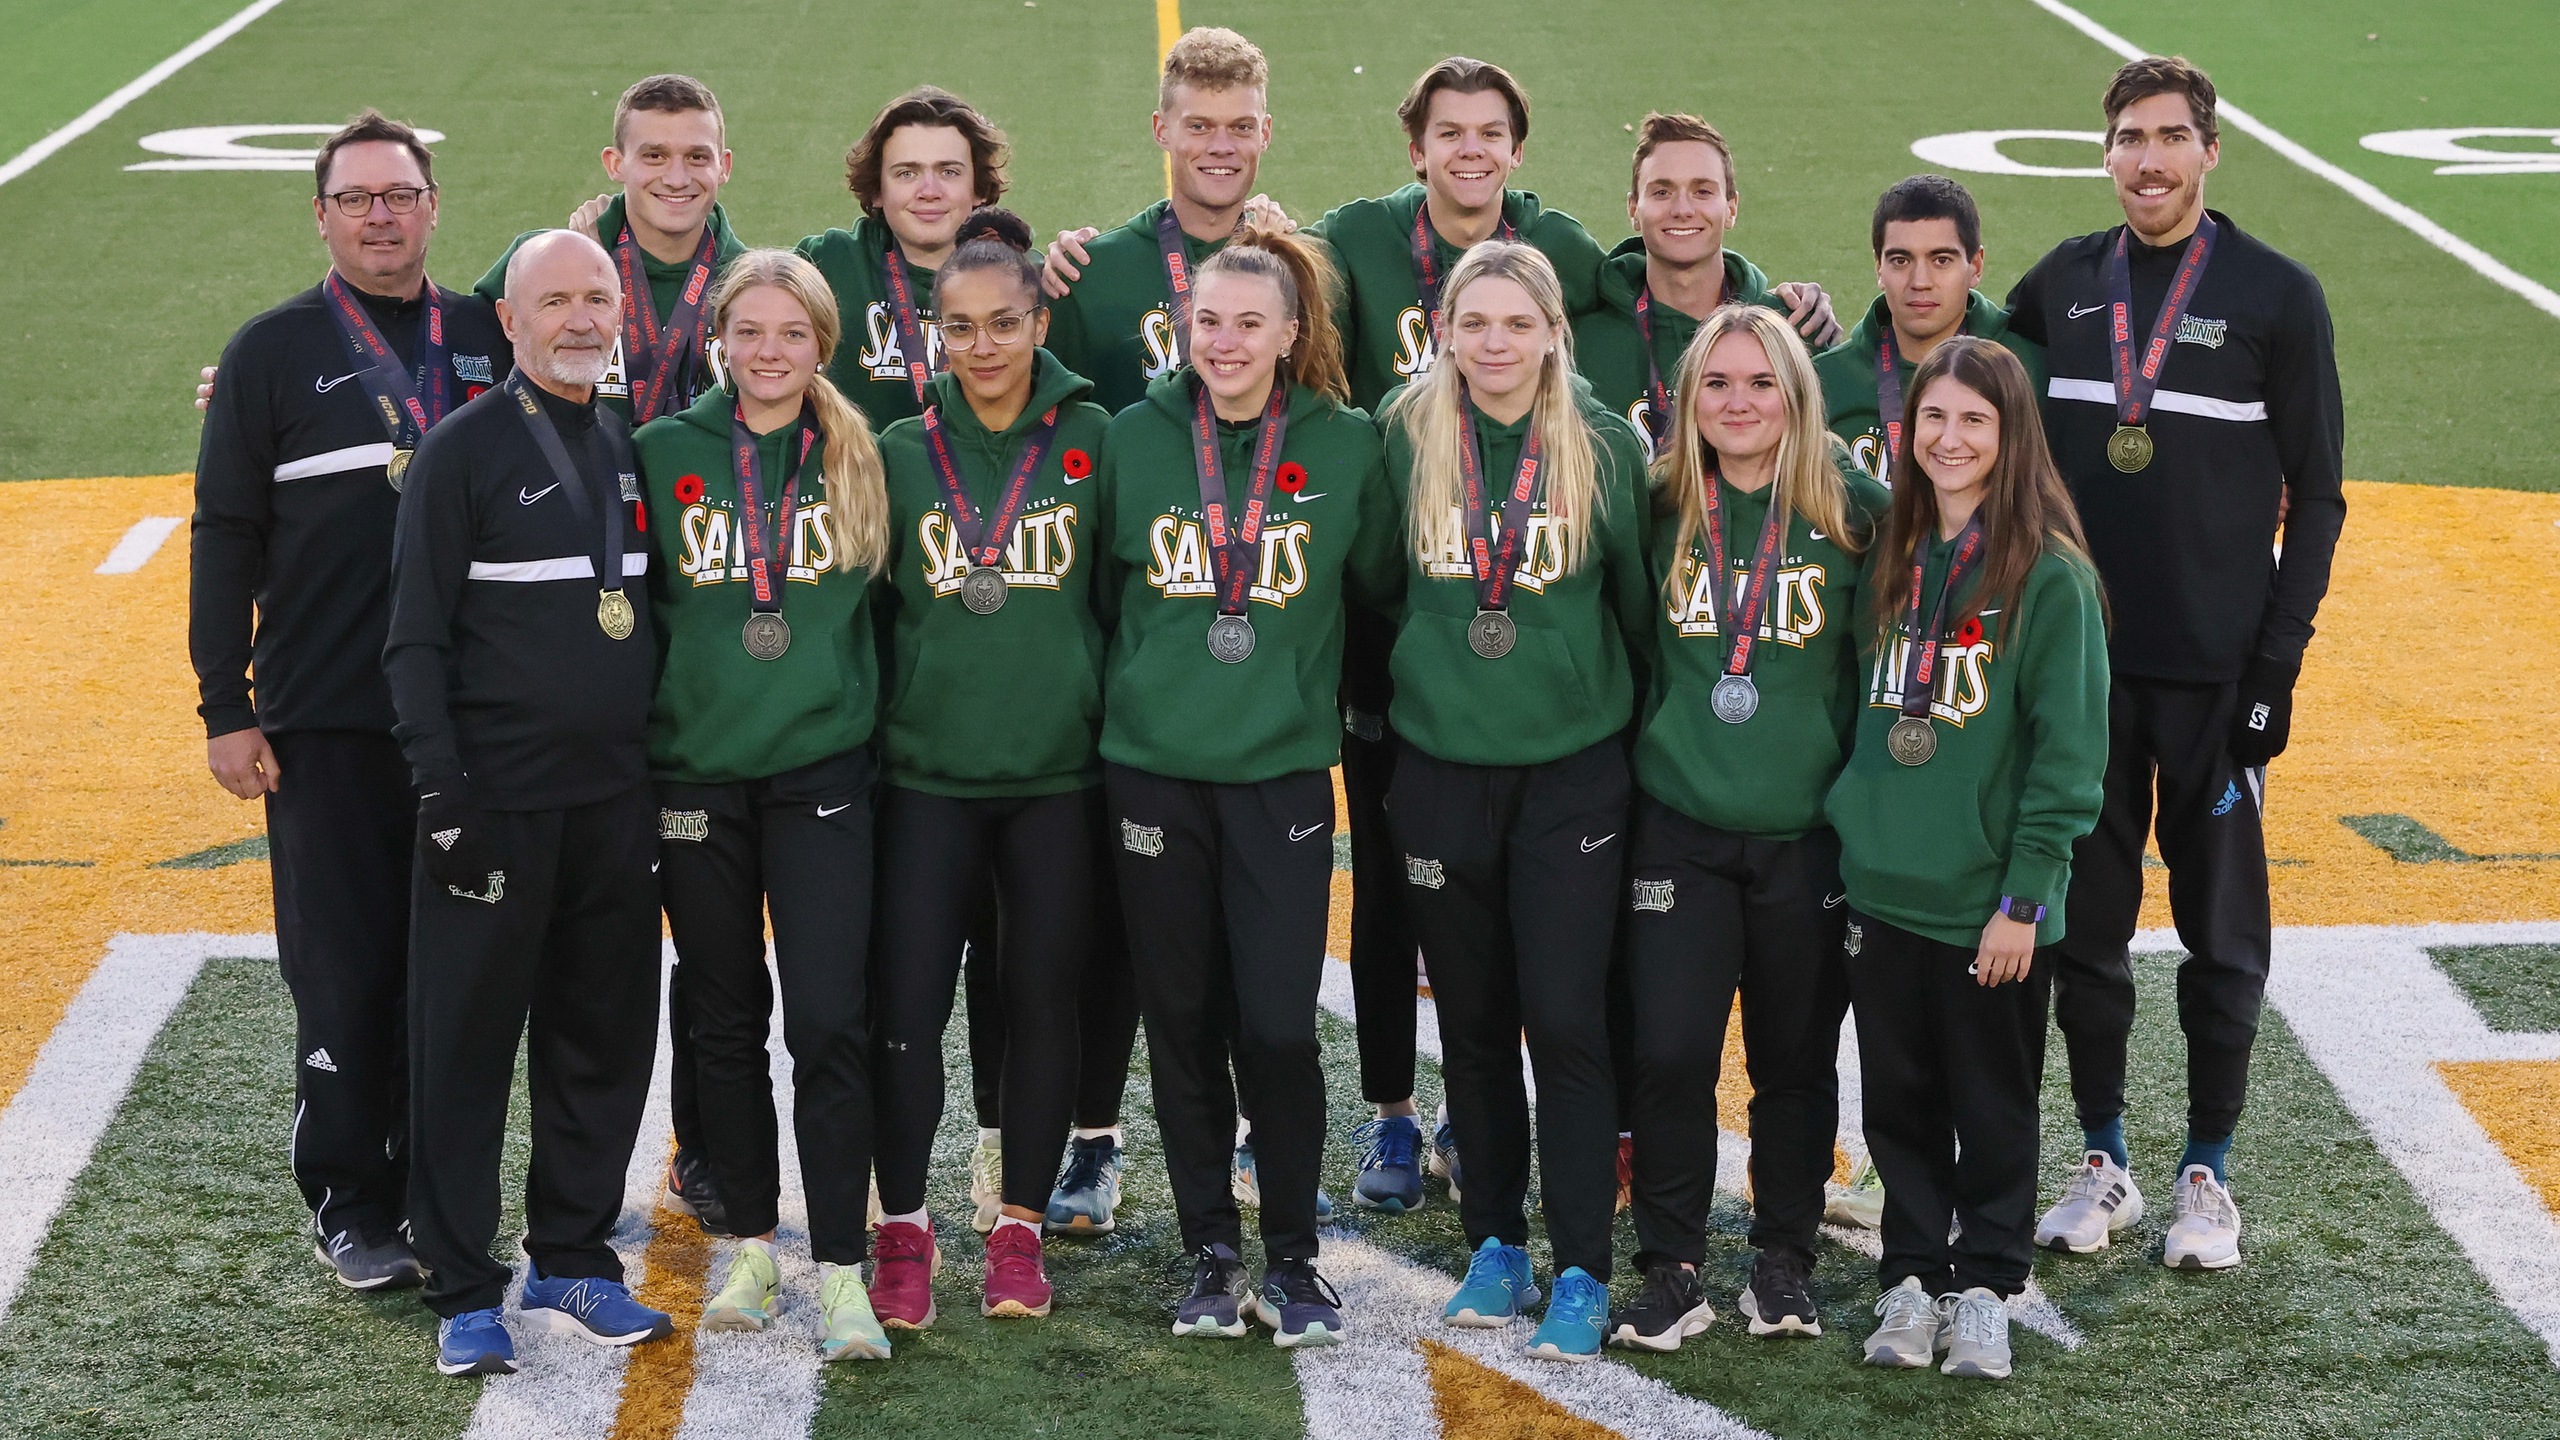 Medal Haul for St. Clair Cross Country at Provincials